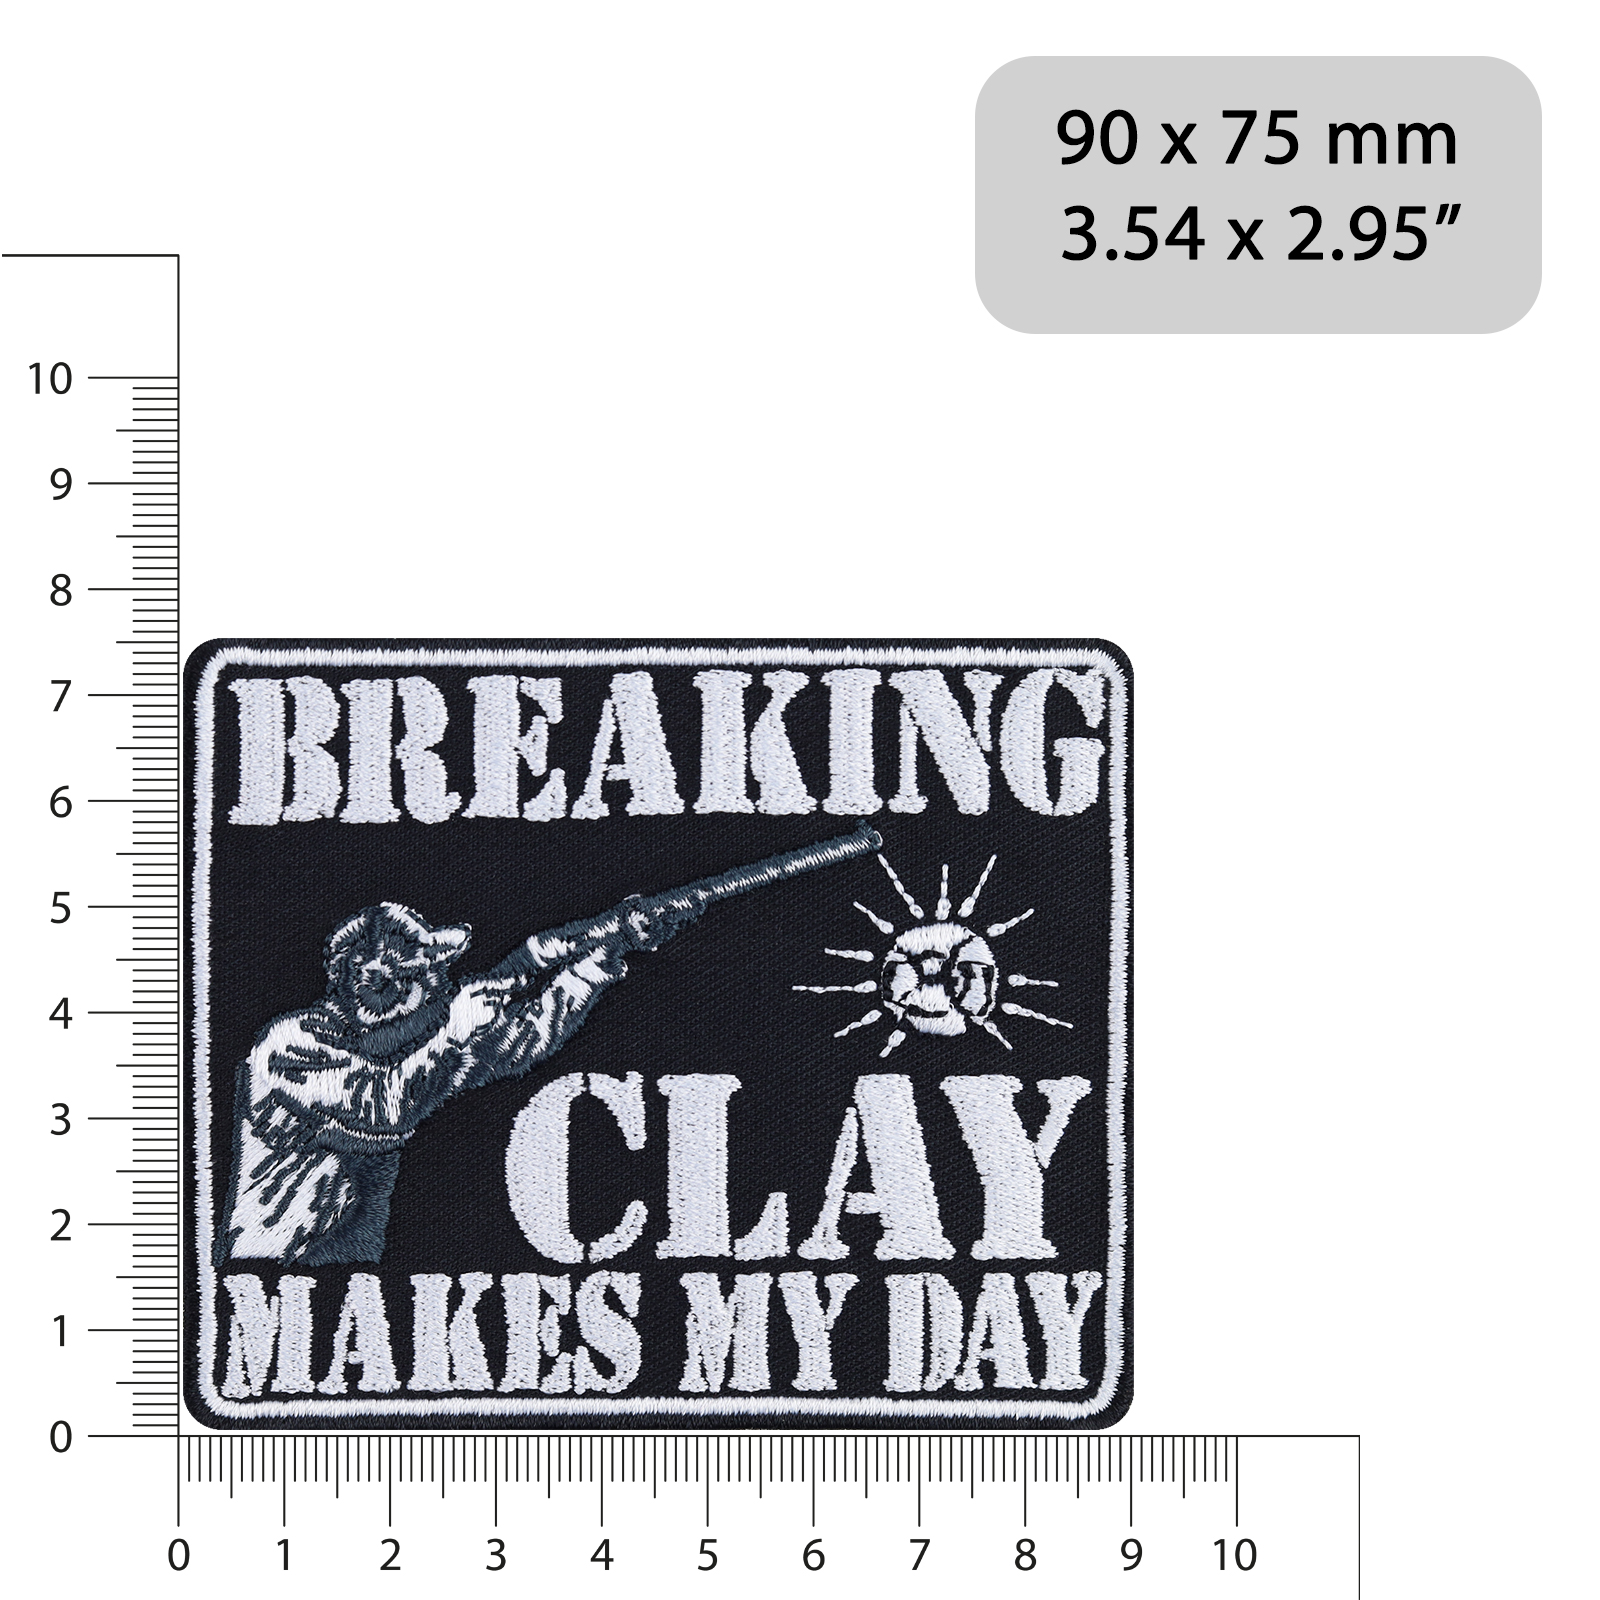 Breaking clay makes my day - Patch